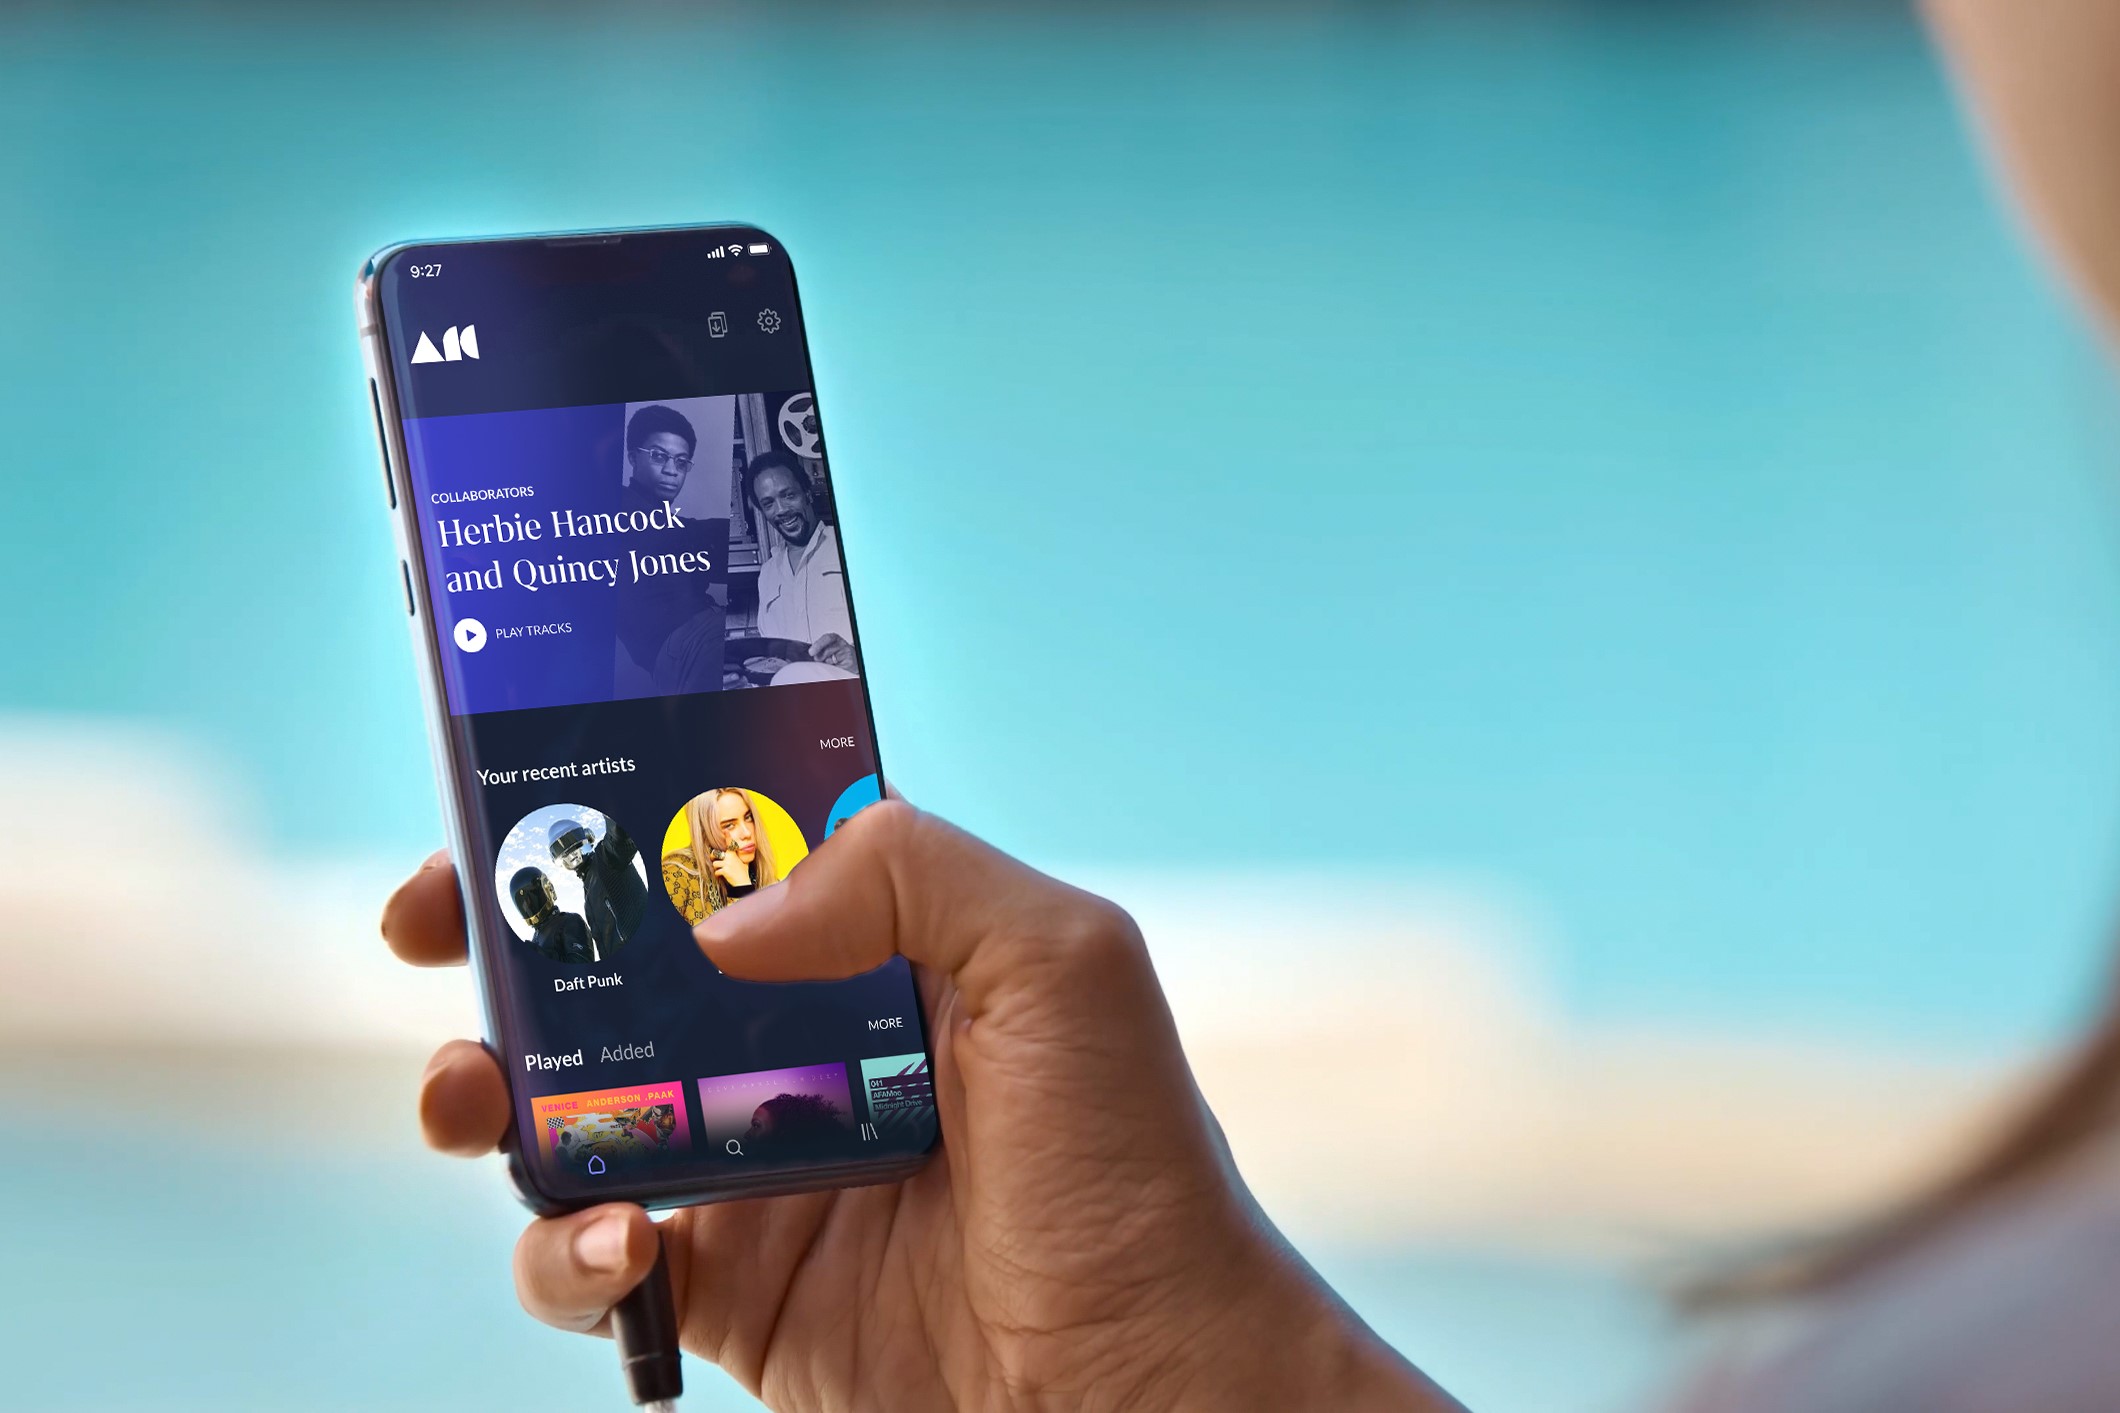 Roon 2.0 Brings Stunning New App With On-The-Go Music Playback